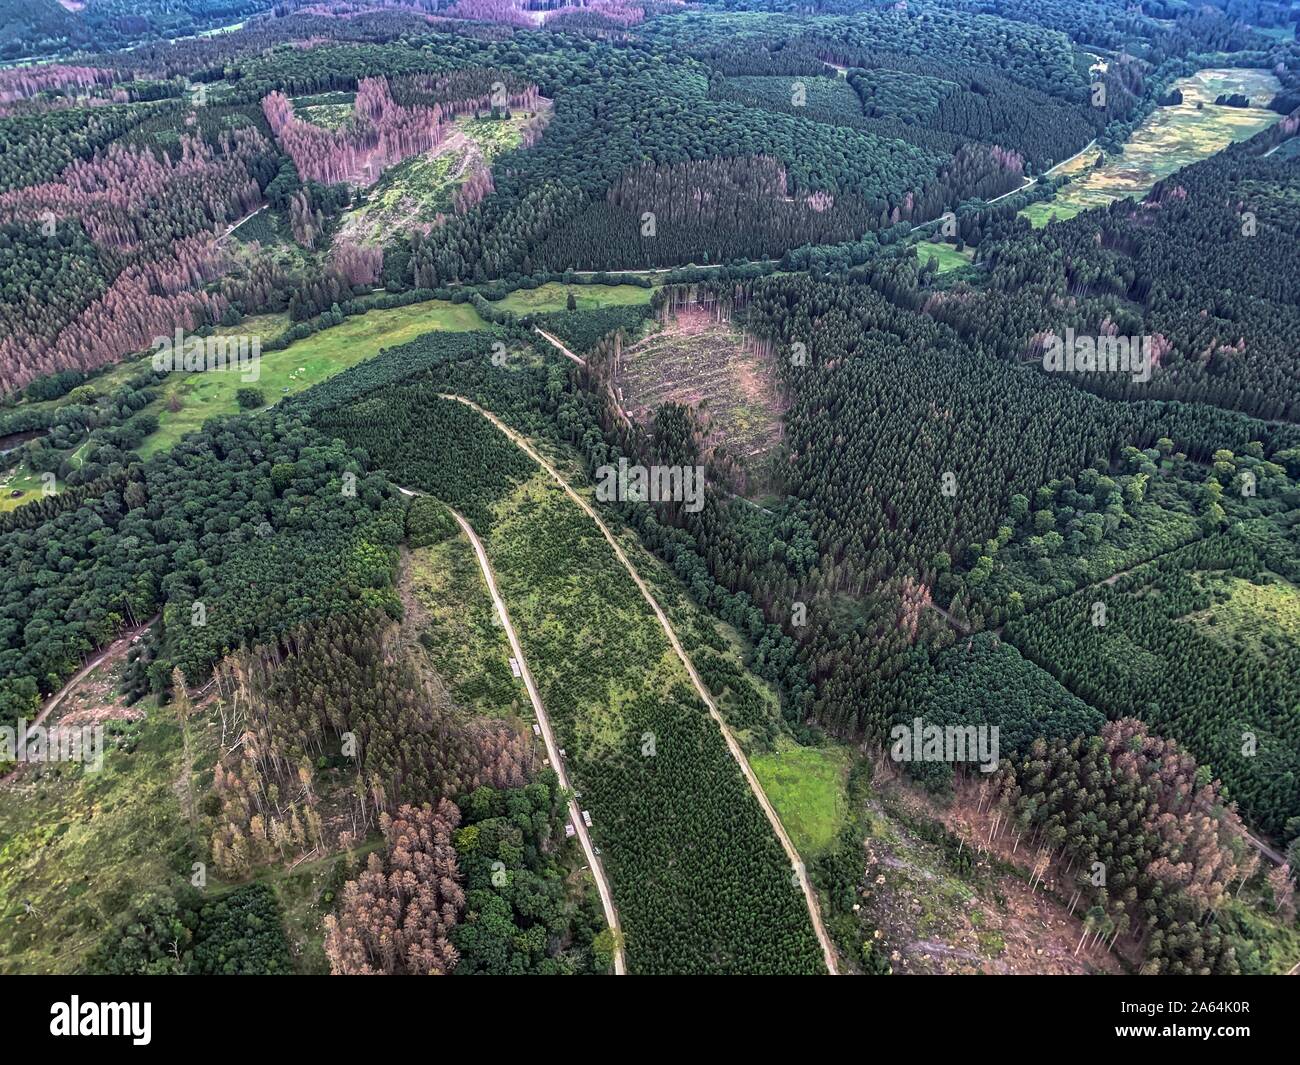 Forest damage in the Arnsberger Wald nature park Park, Sauerland, near Warstein, Germany Stock Photo